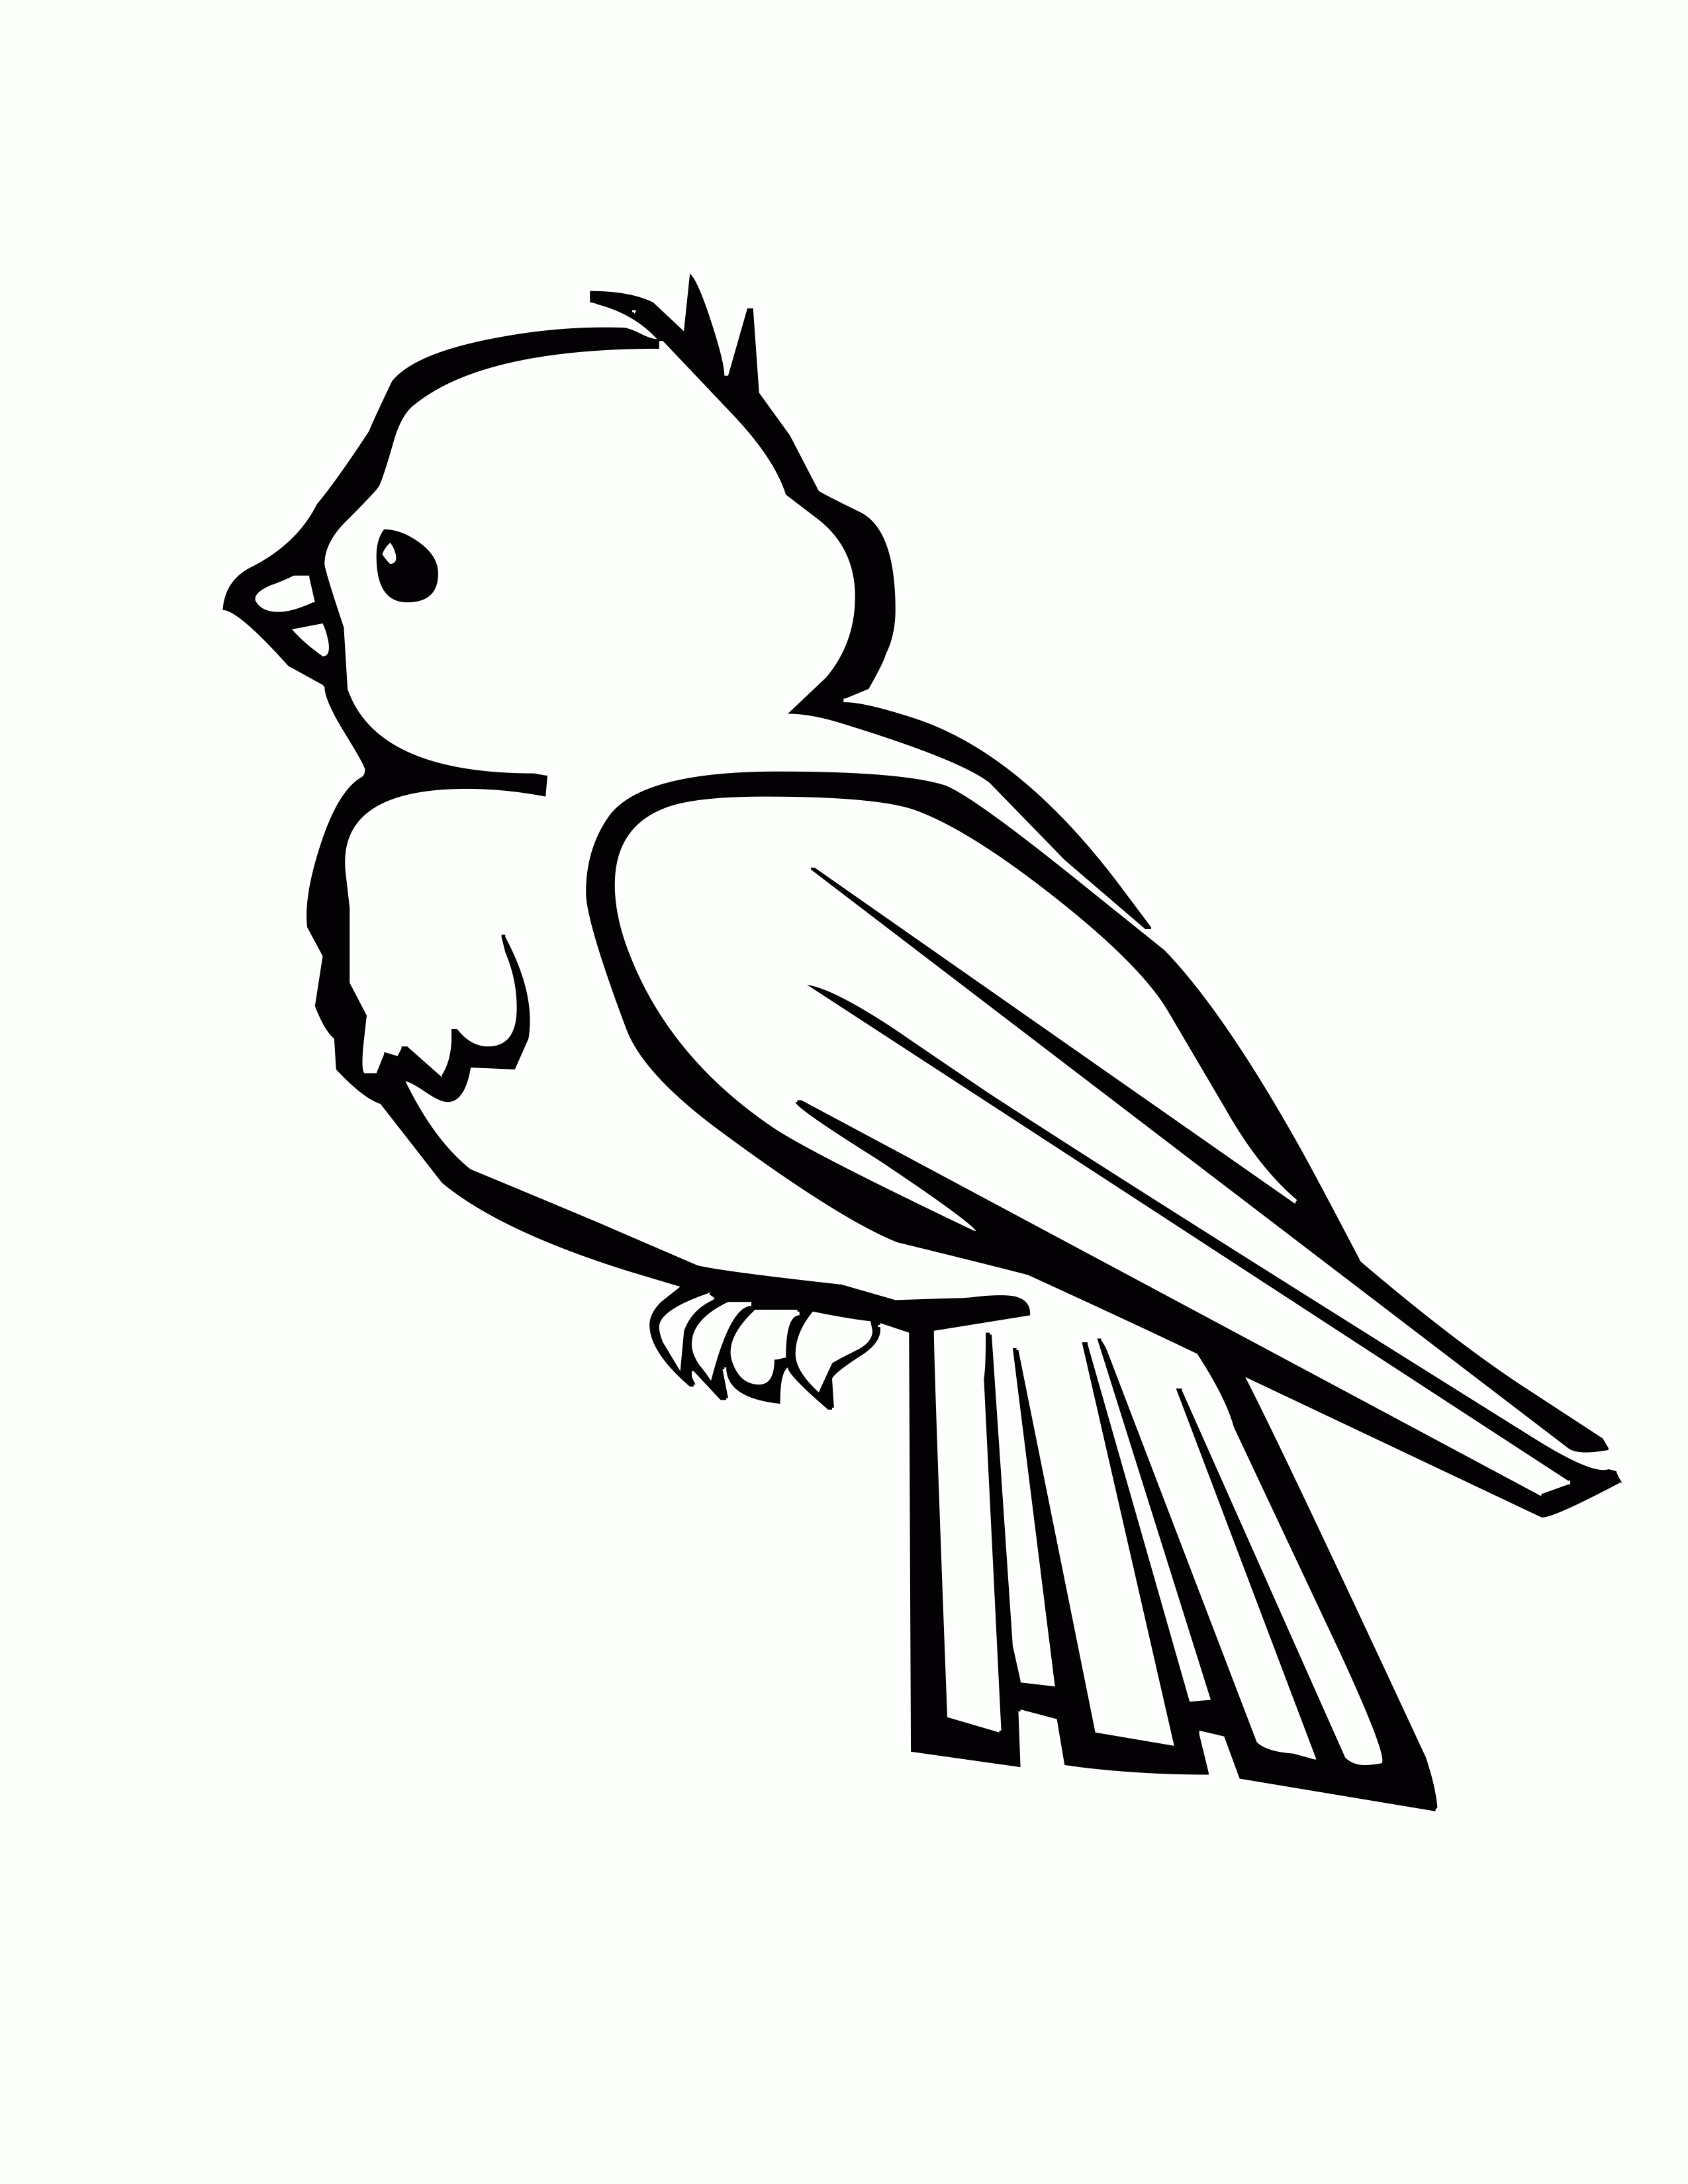 Coloring Pages Birds To Print - Coloring Pages For All Ages